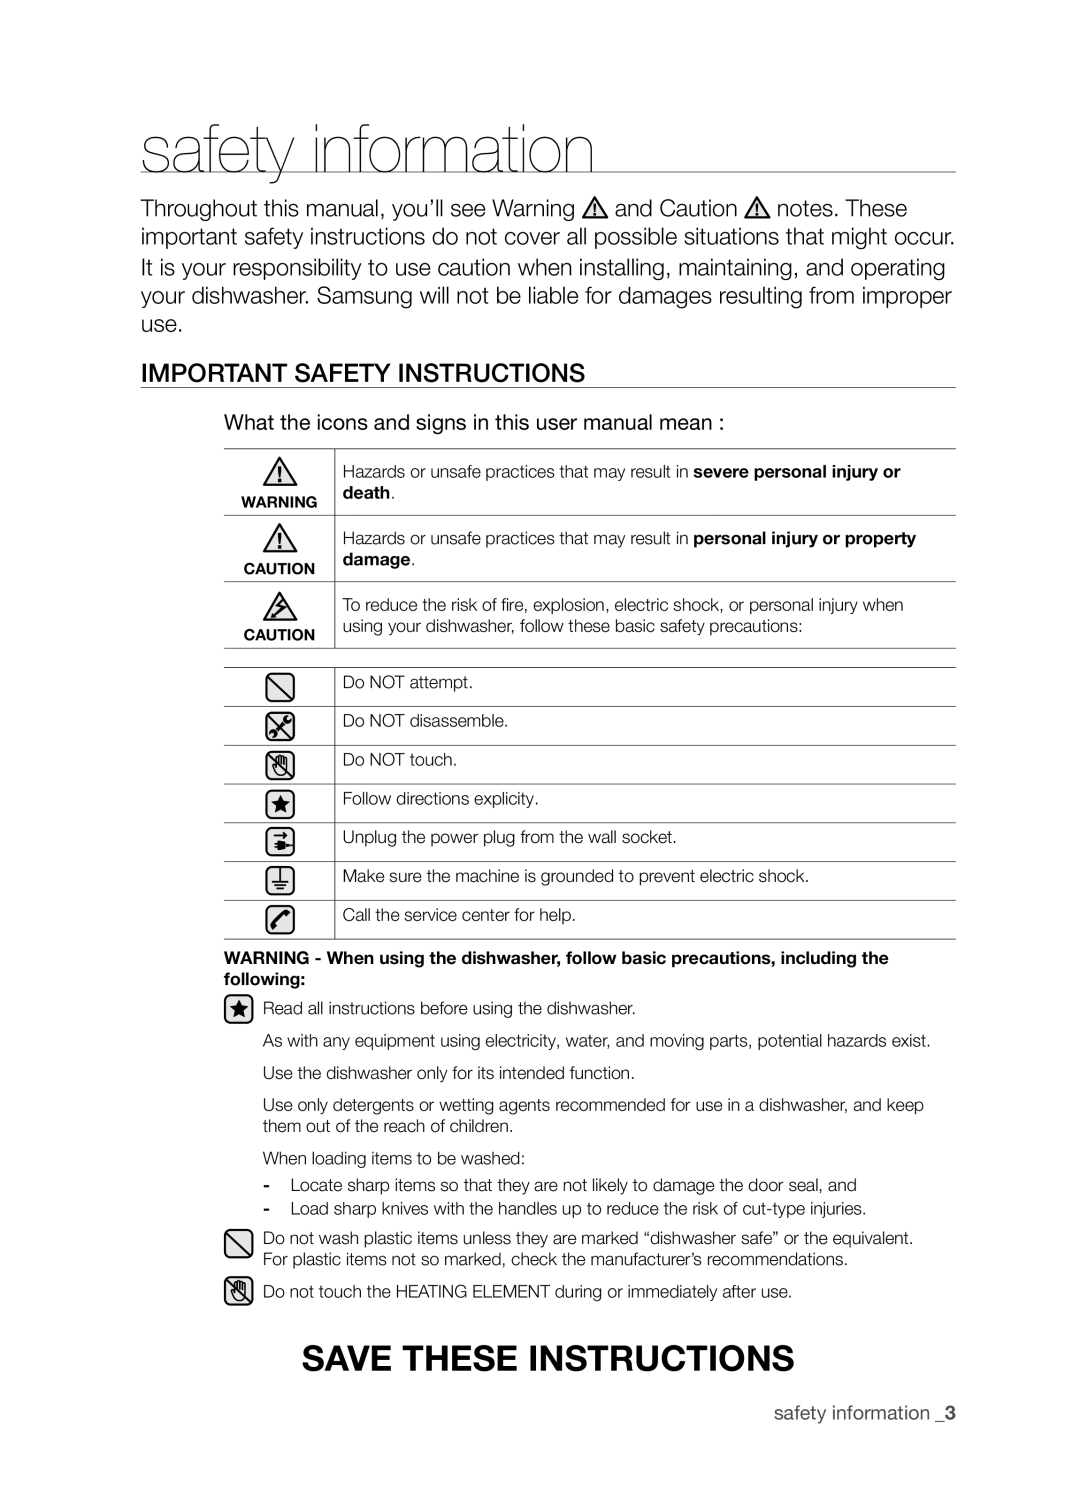 Samsung DMT800RHS, DMT800 Series manual safety information, Save these instructions, Important safety instructions 